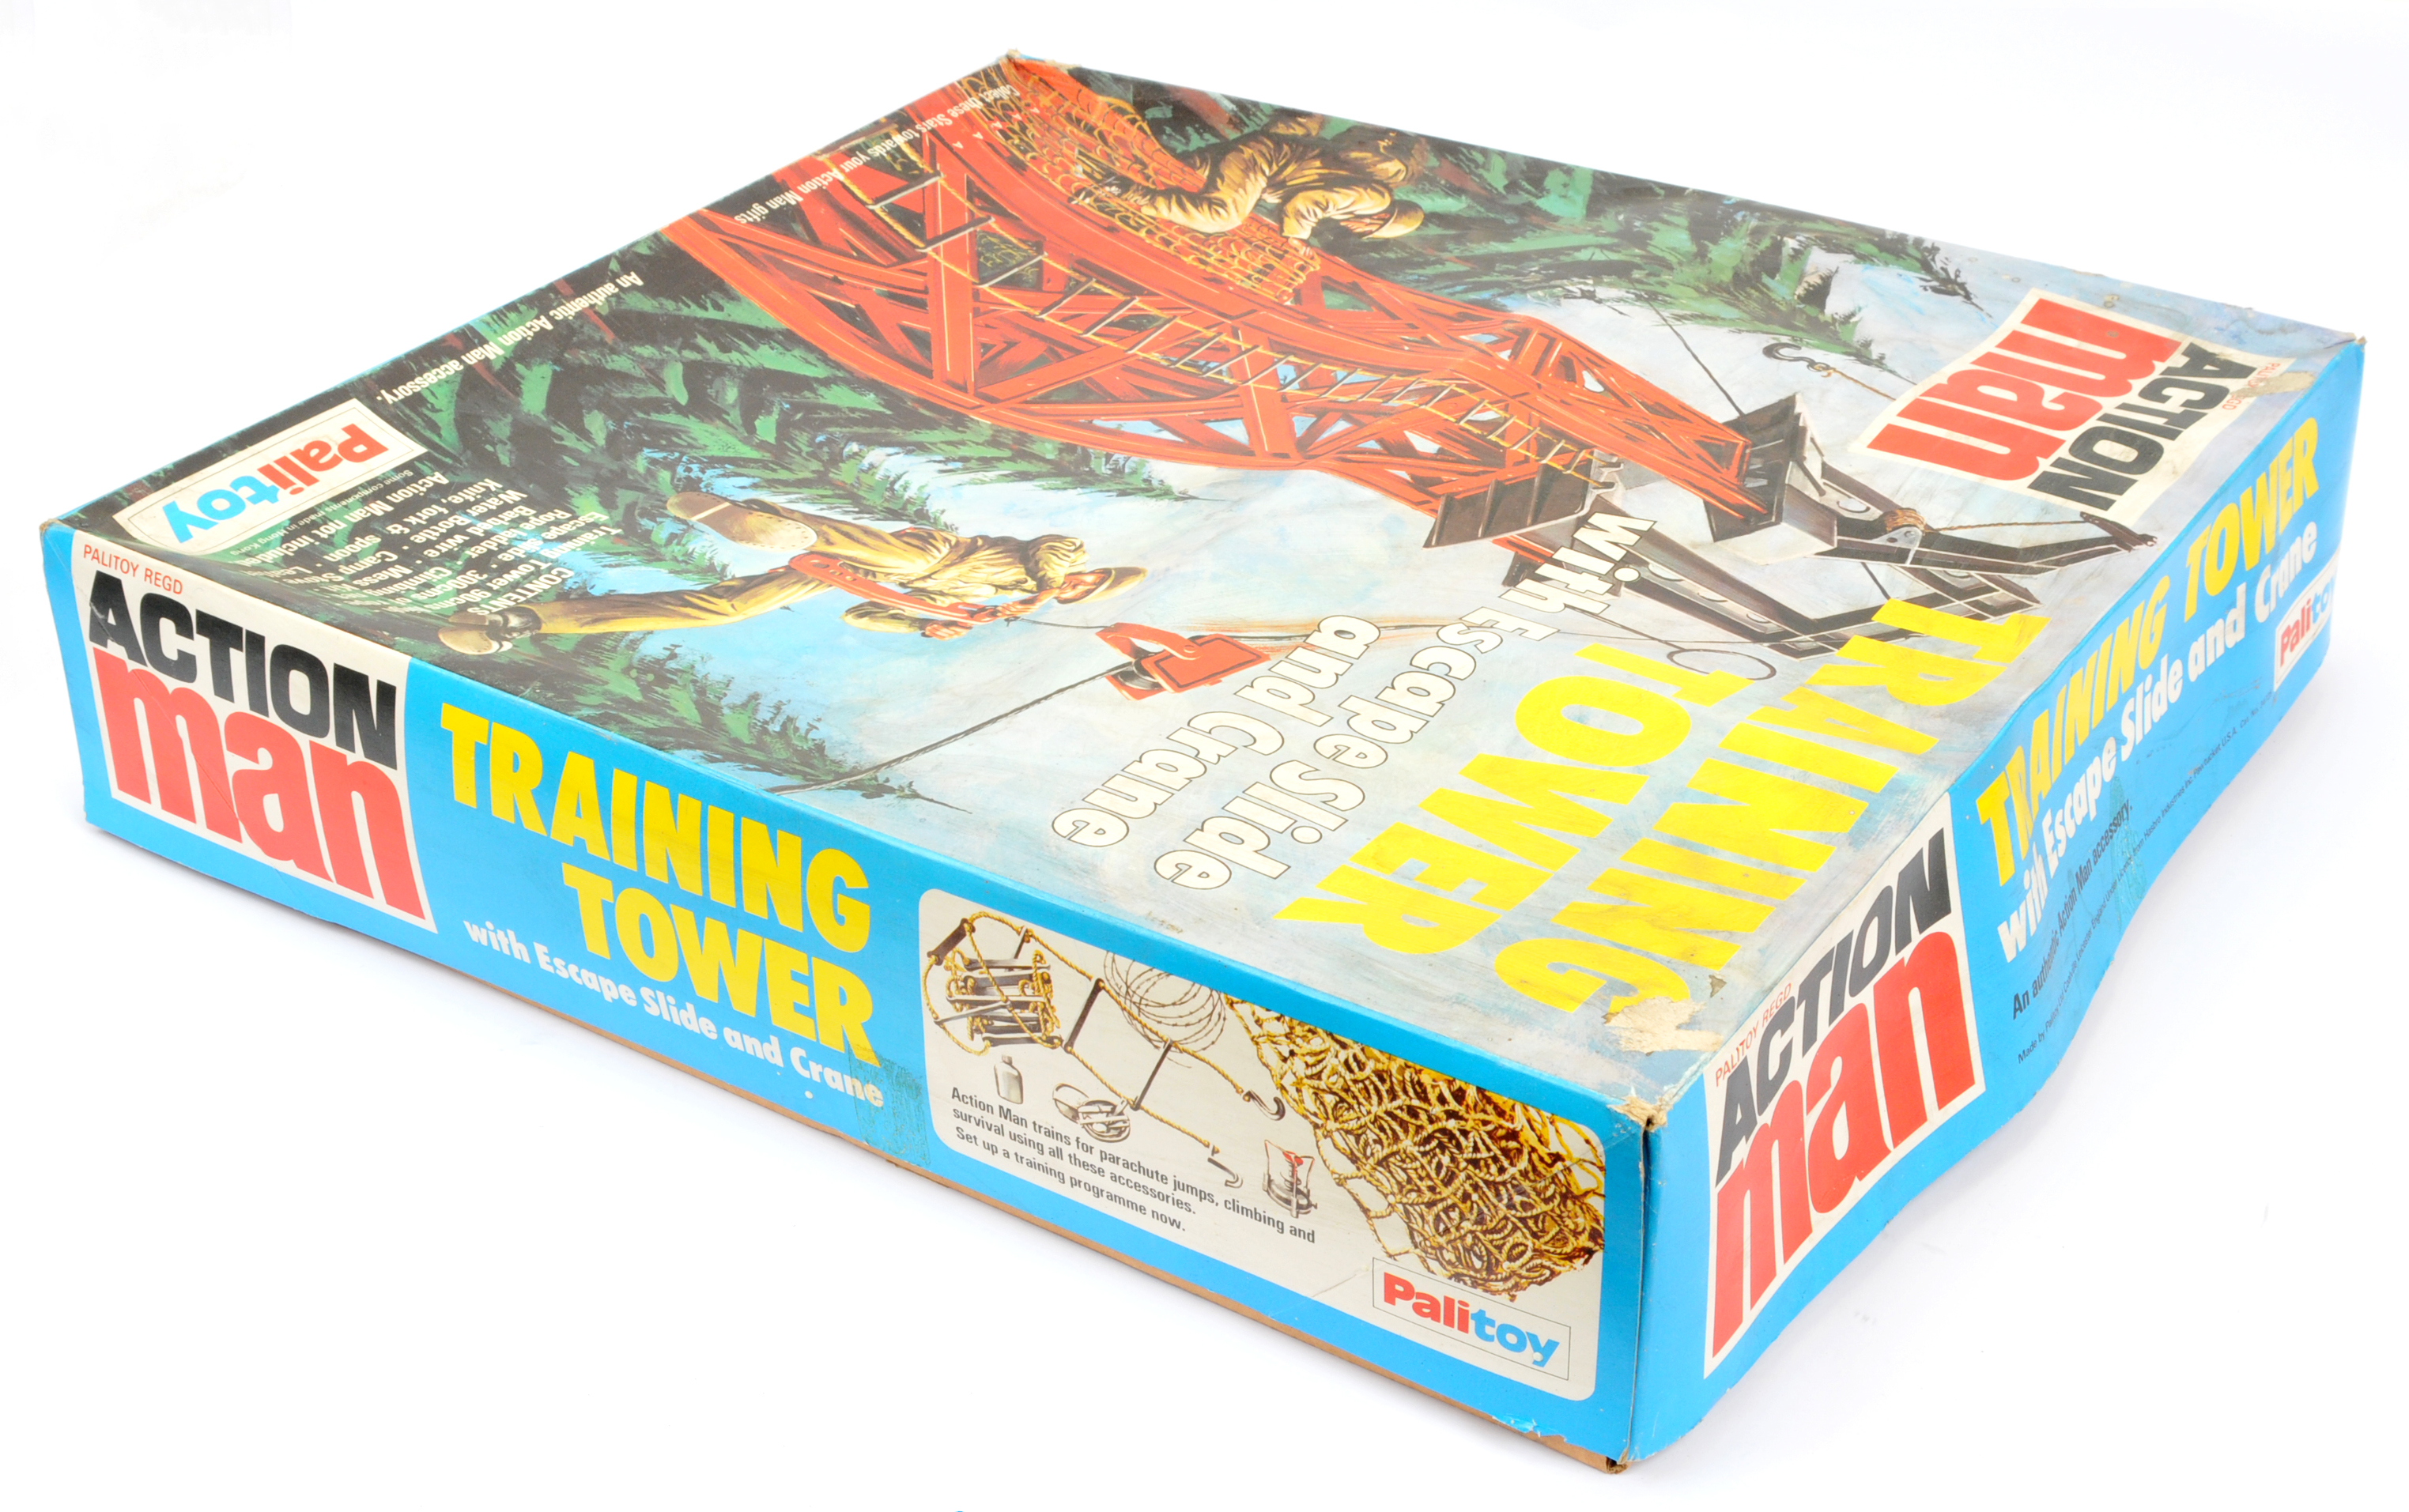 Palitoy Action Man Vintage Training Tower #34725 with Escape Slide and Crane in original box, var... - Image 2 of 2